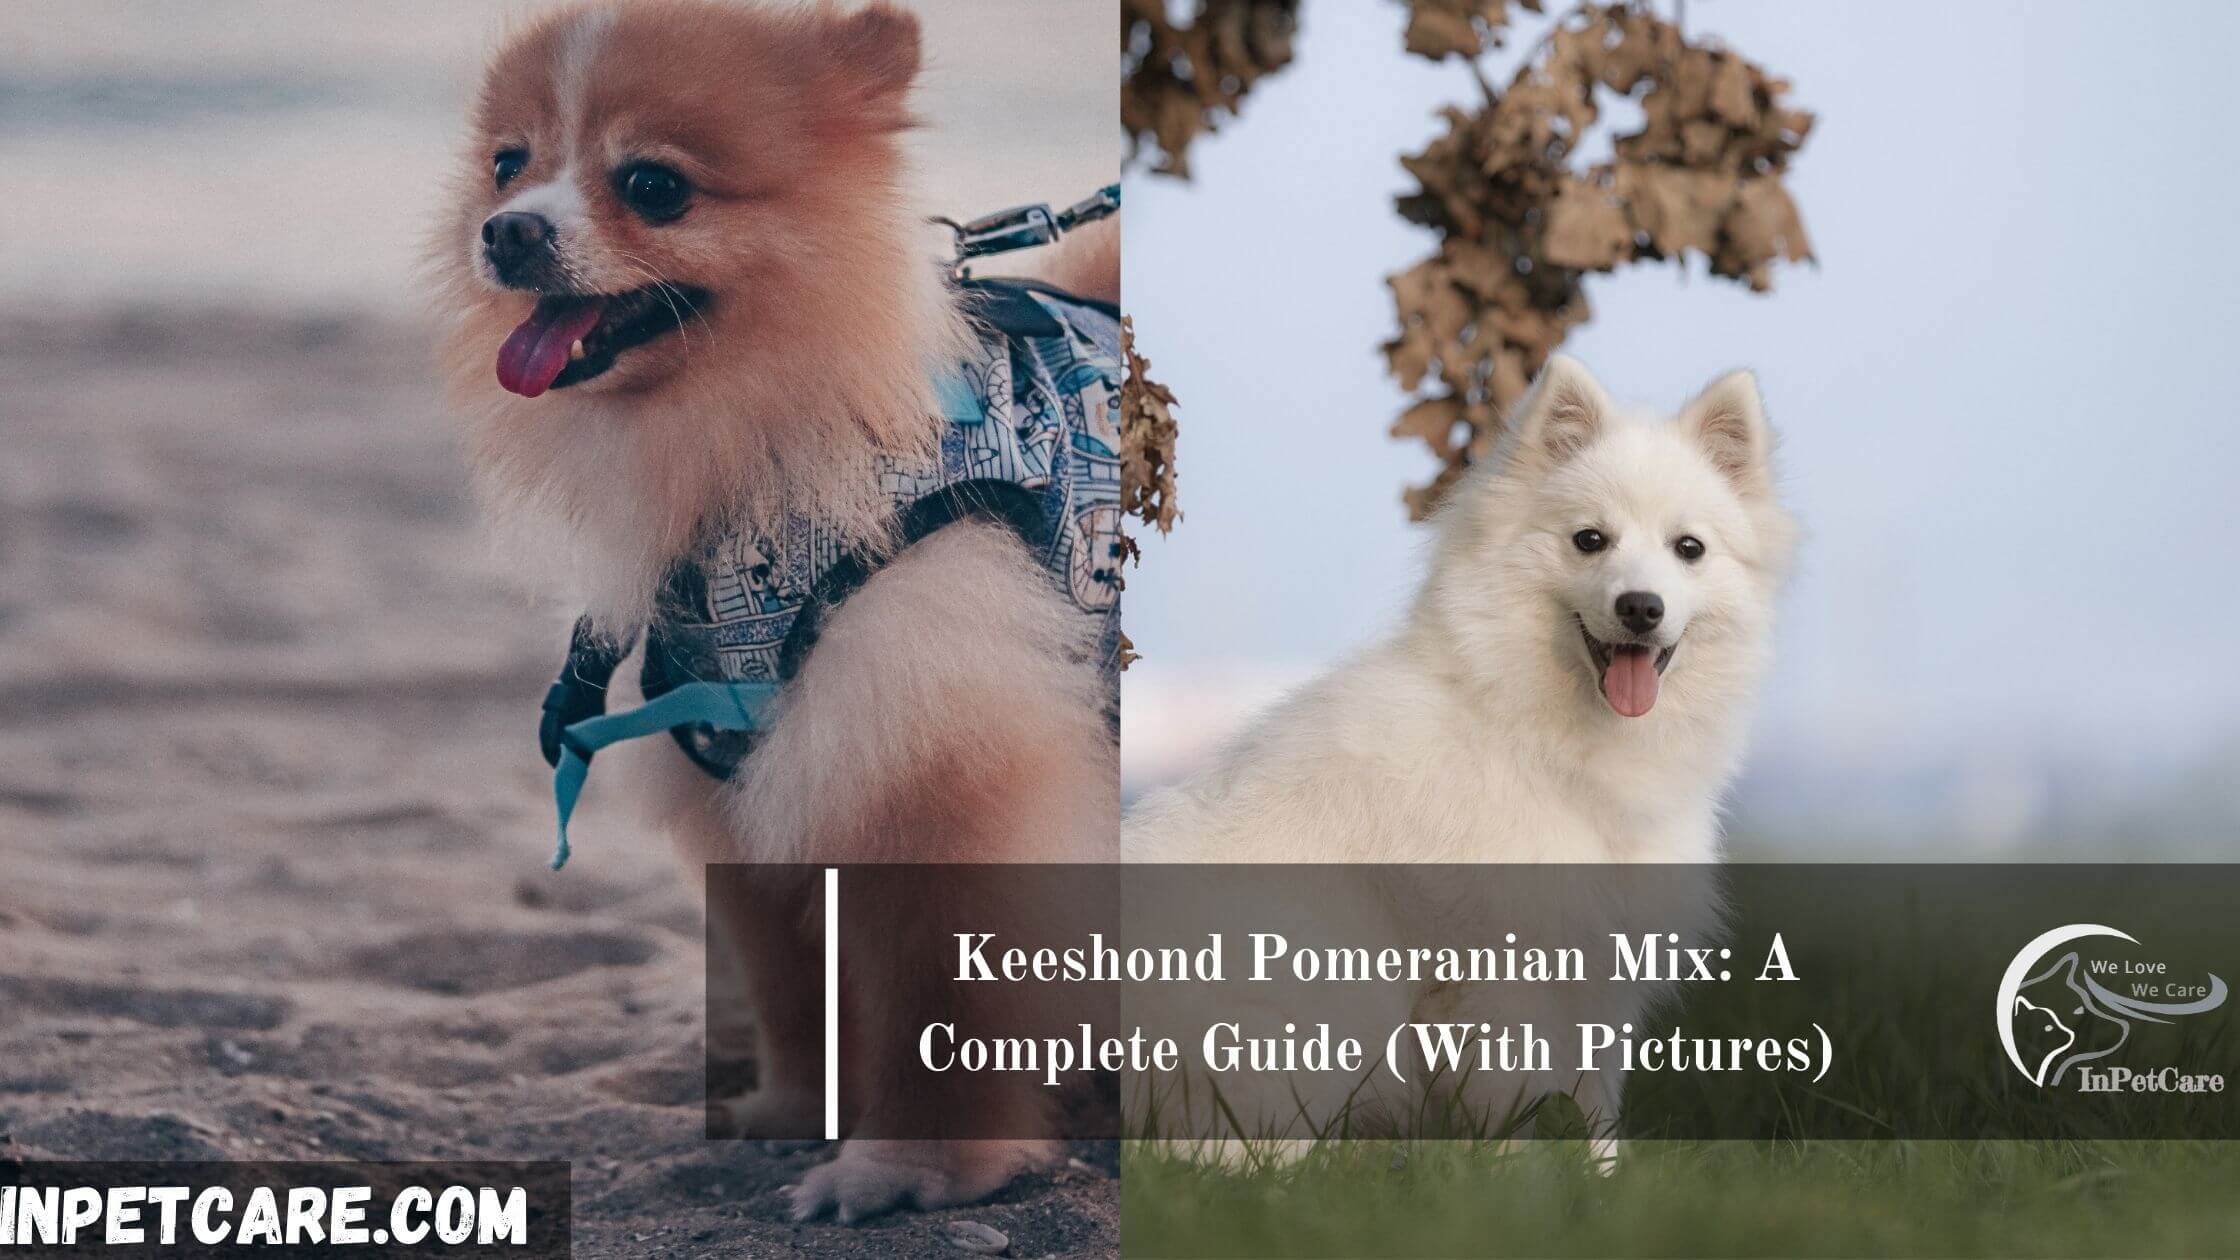 Keeshond Pomeranian Mix: A Complete Guide (With Pictures)